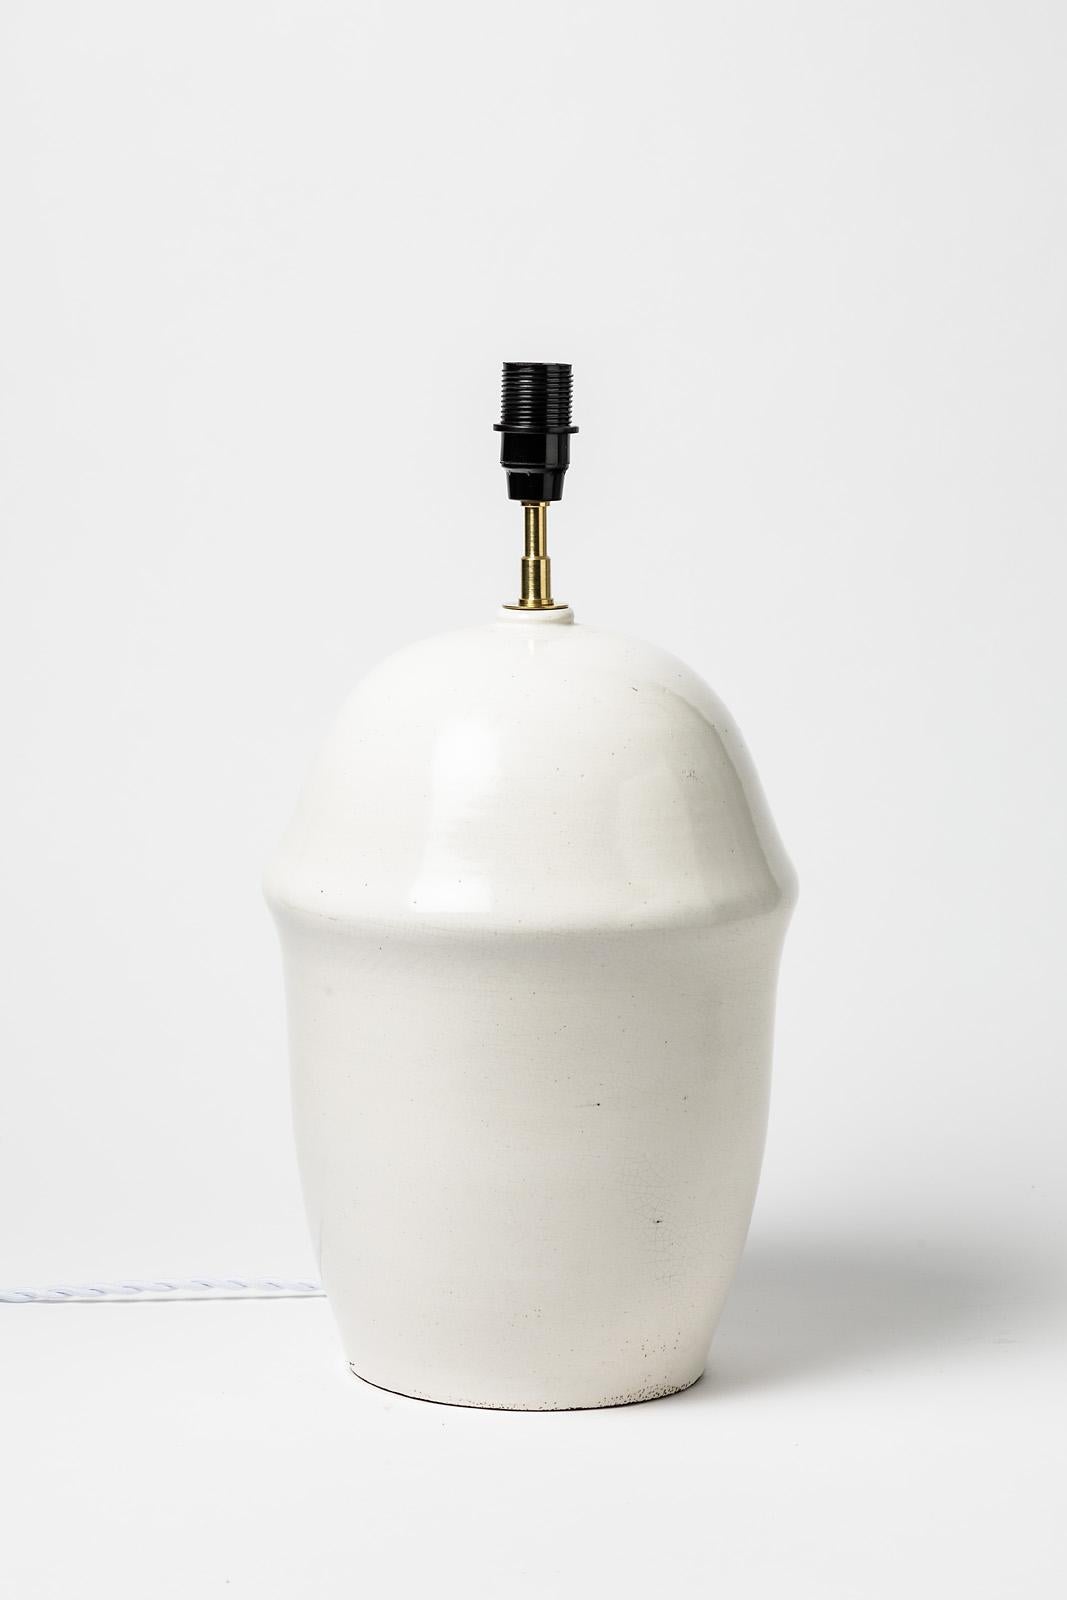 French Art Deco Ceramic Table Lamp White Pottery Color in Style of Jean Besnard, 1930 For Sale